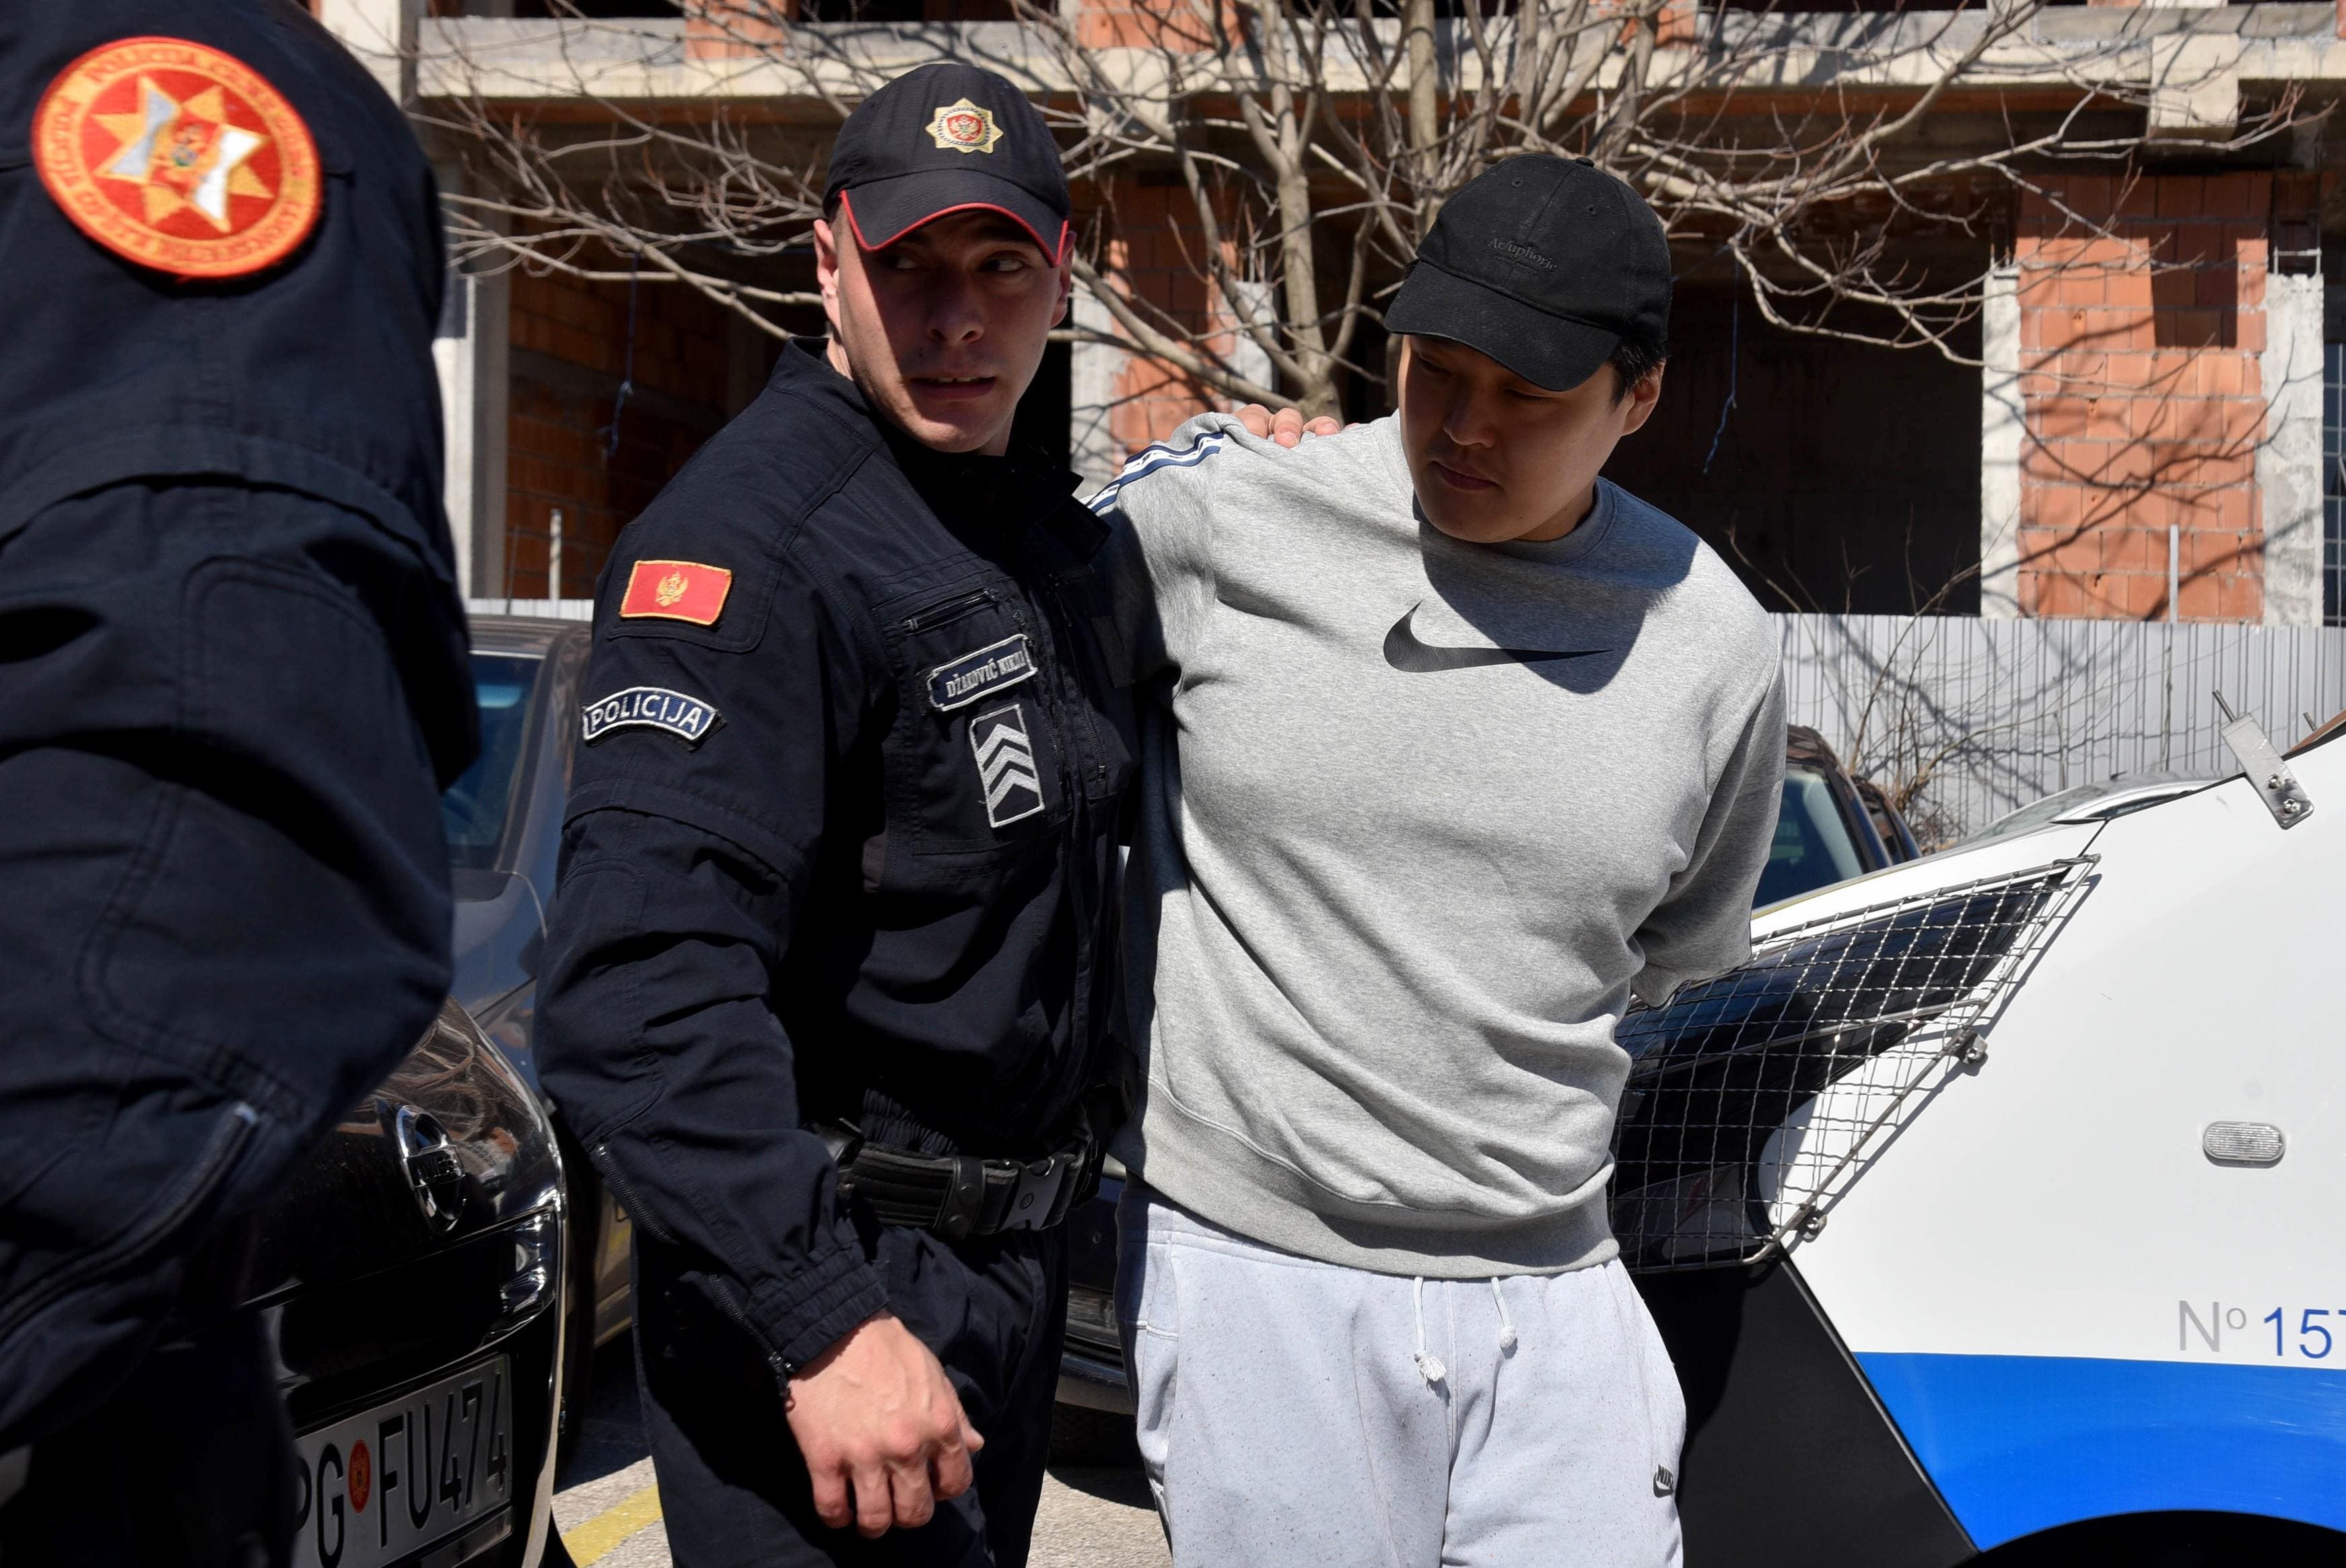 Man suspected of being crypto fugitive Do Kwon arrested in Montenegro | Montenegro | The Guardian